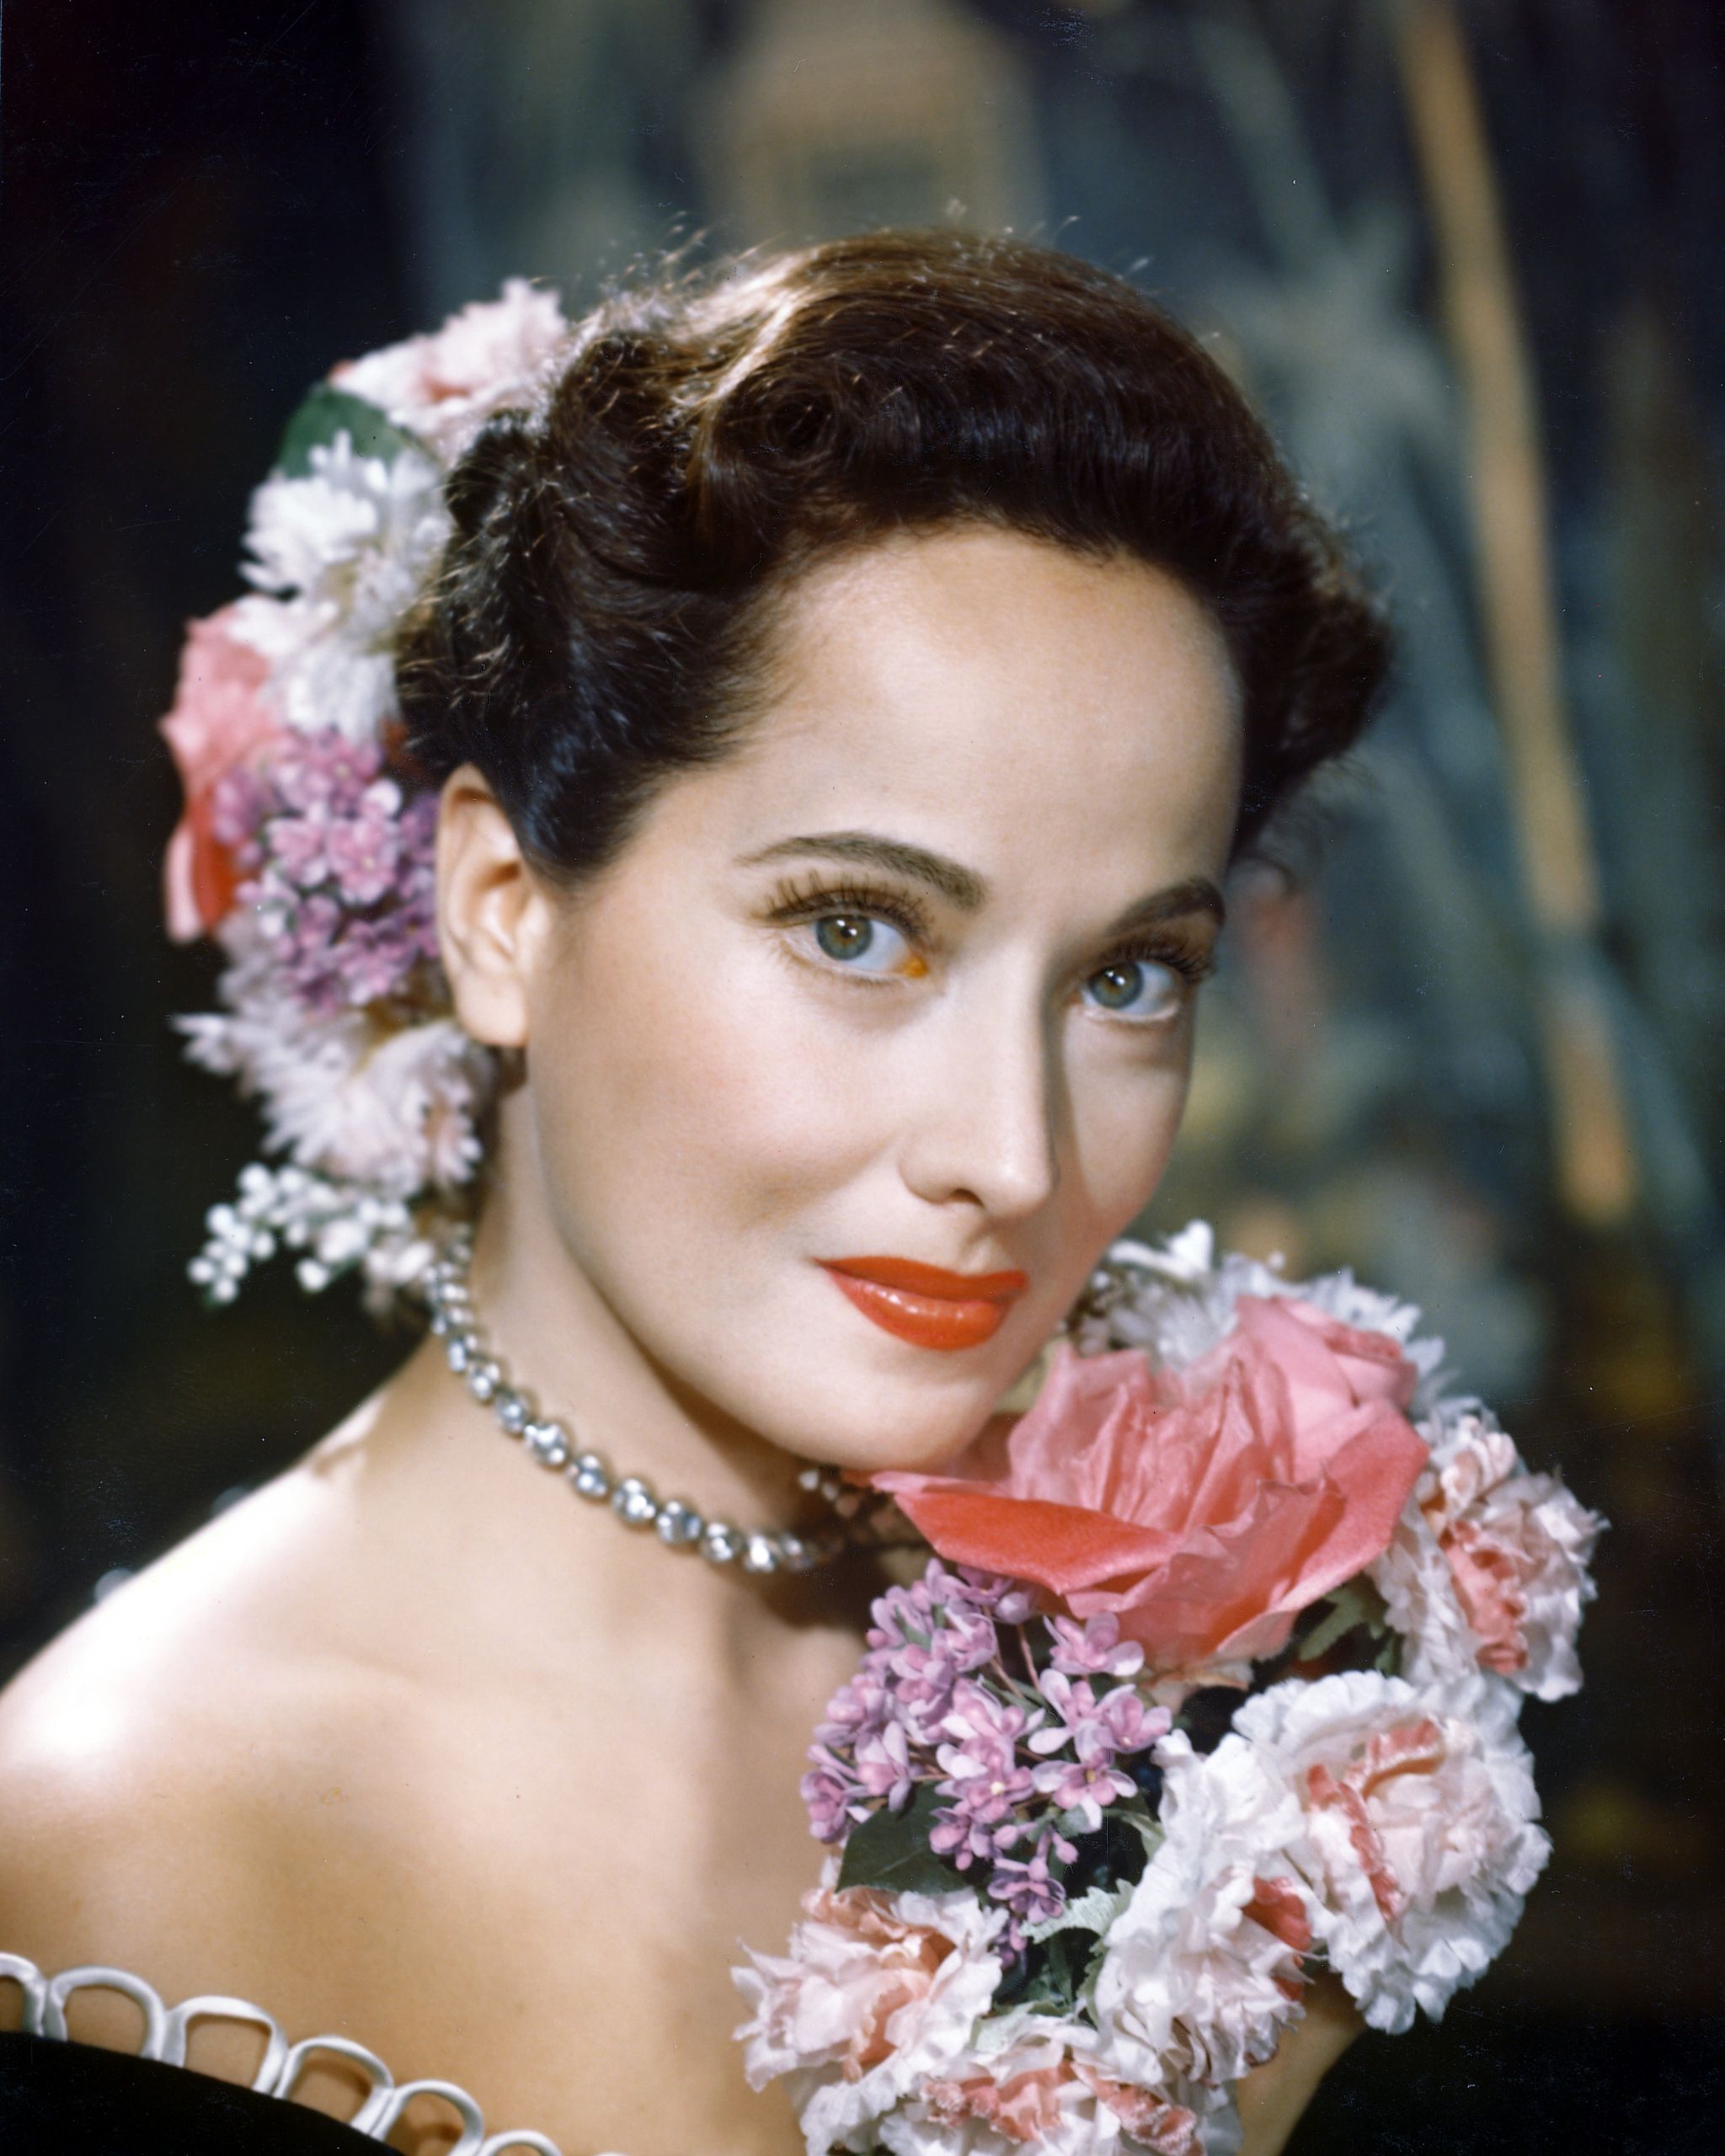 merle oberon 1911 1979, british actress, poses with a bouquet of flowers, with flowers in her hair, in a studio portrait, circa 1940 photo by silver screen collectiongetty images